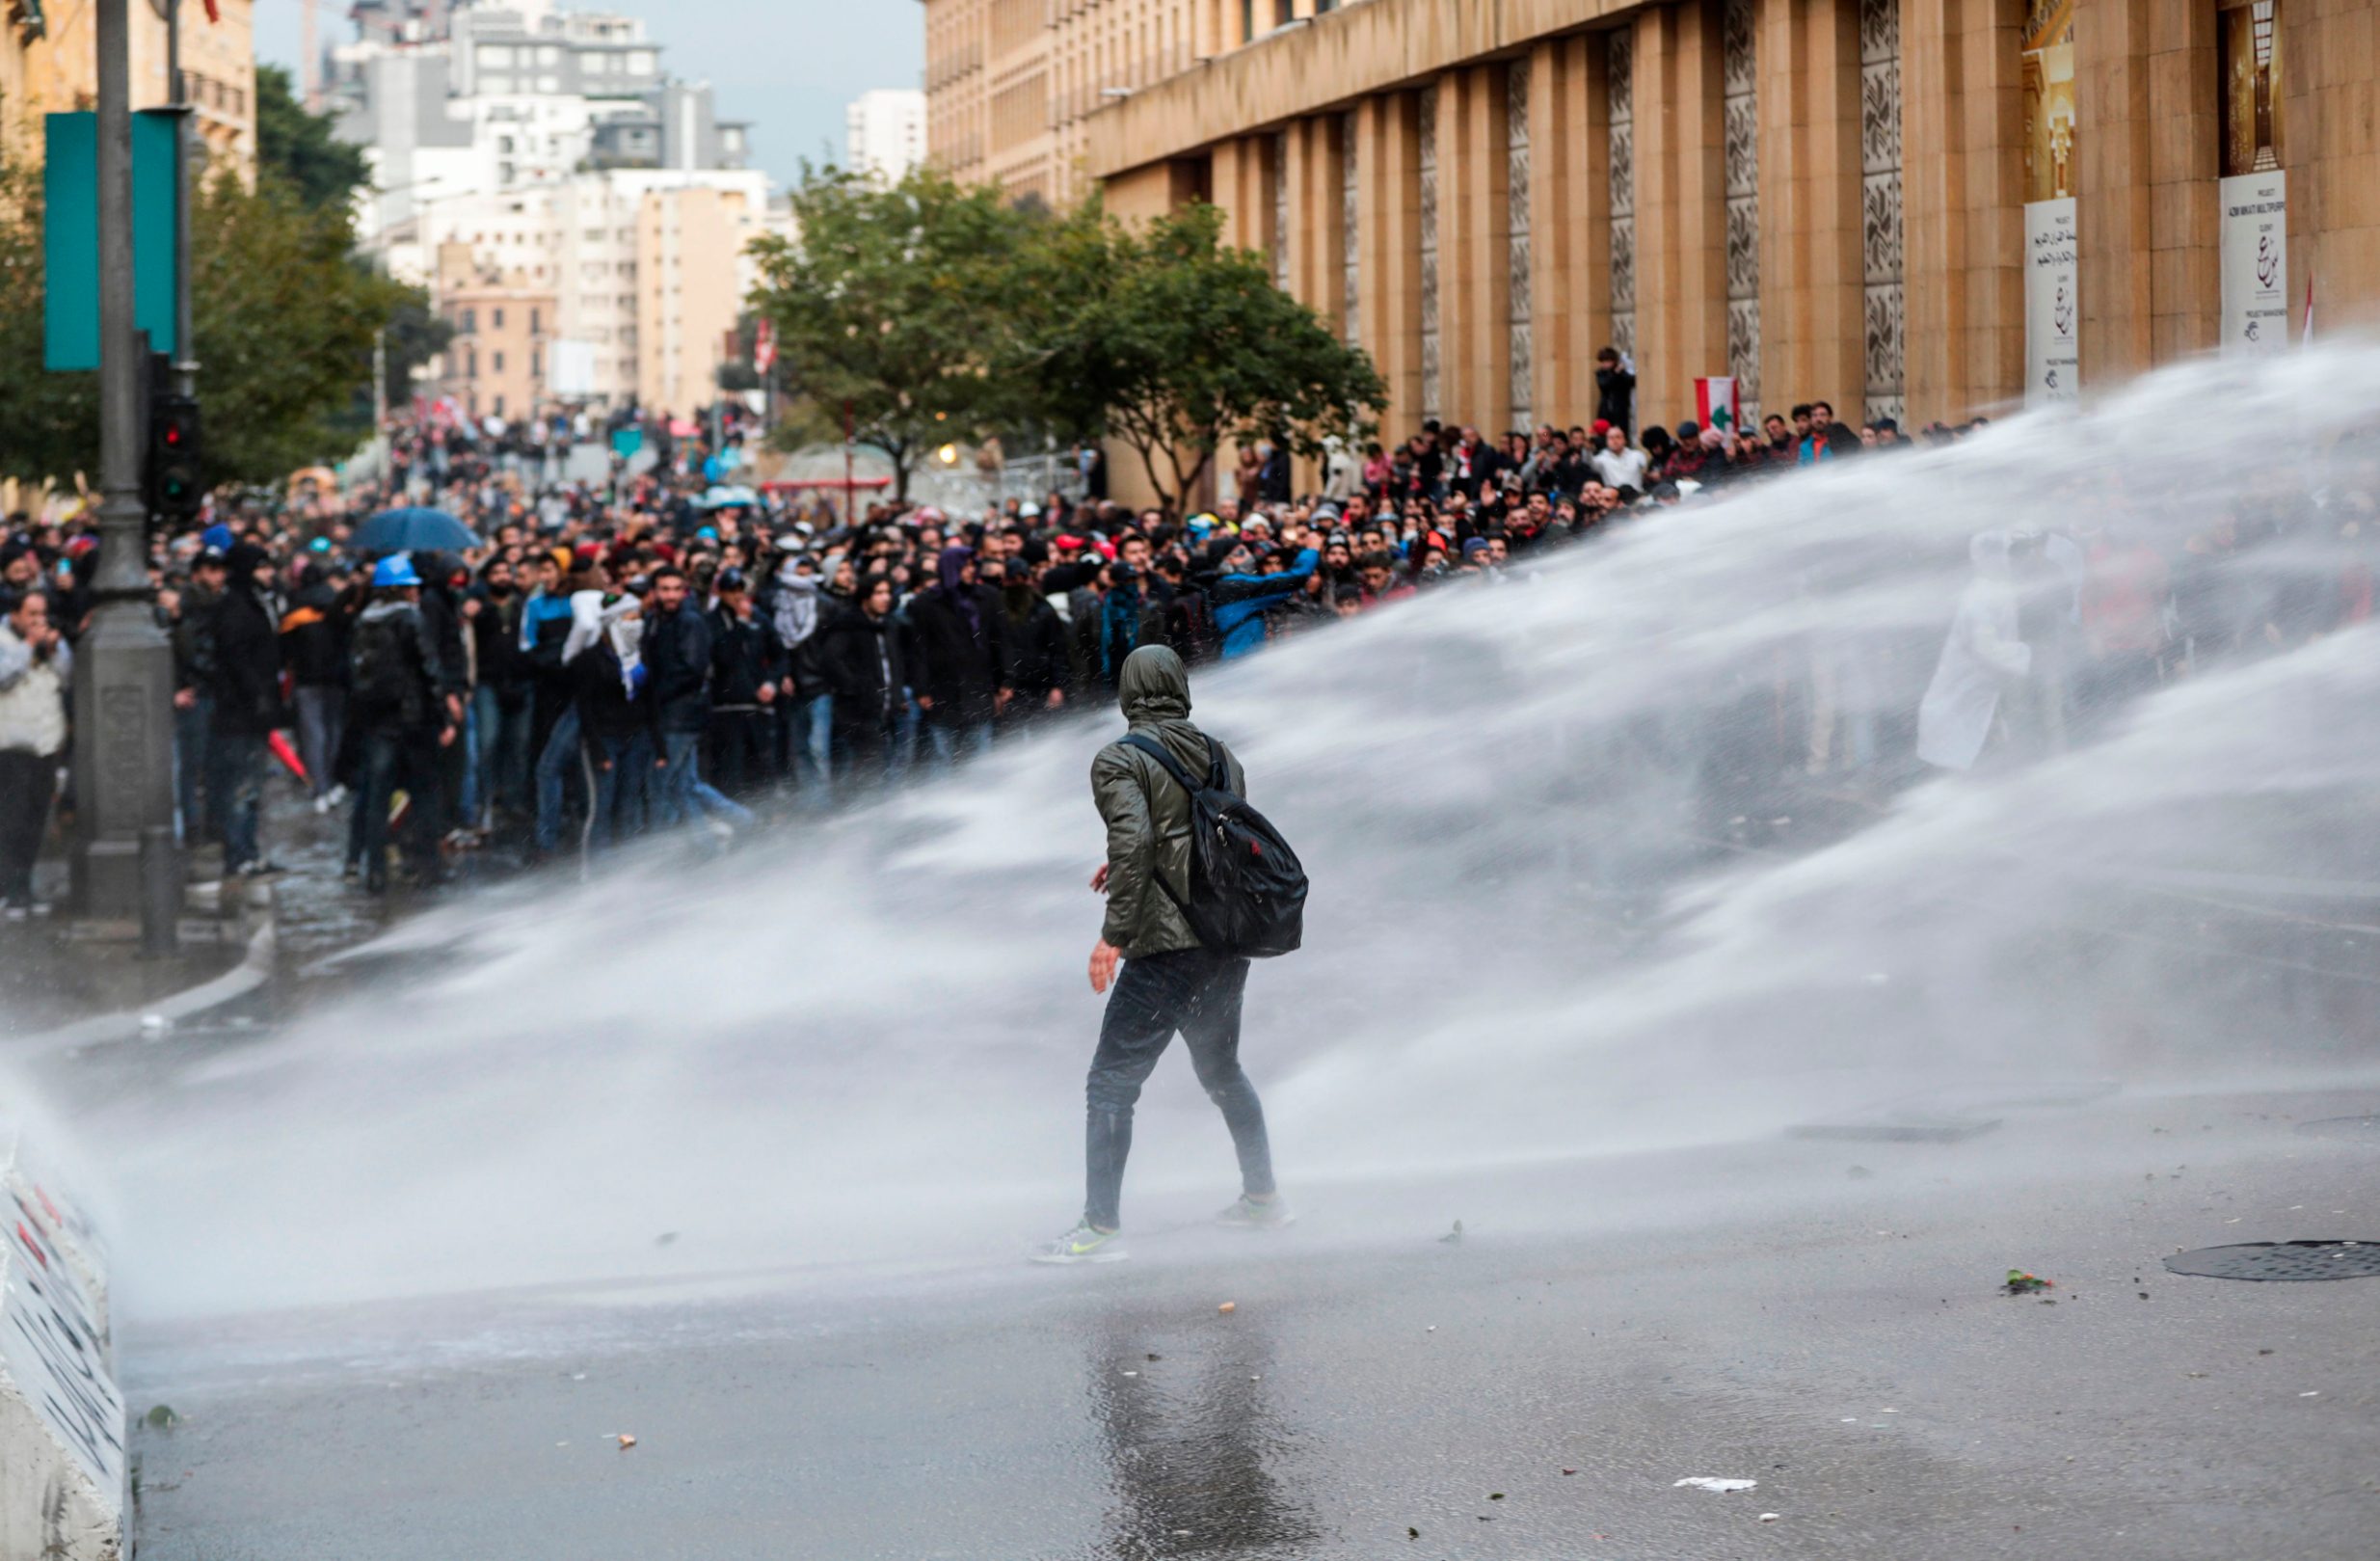 An anti-government protester walks through water cannon spray from security forces during clashes in the central downtown district of the Lebanese capital near the parliament headquarters on January 18, 2020. (Photo by ANWAR AMRO / AFP)